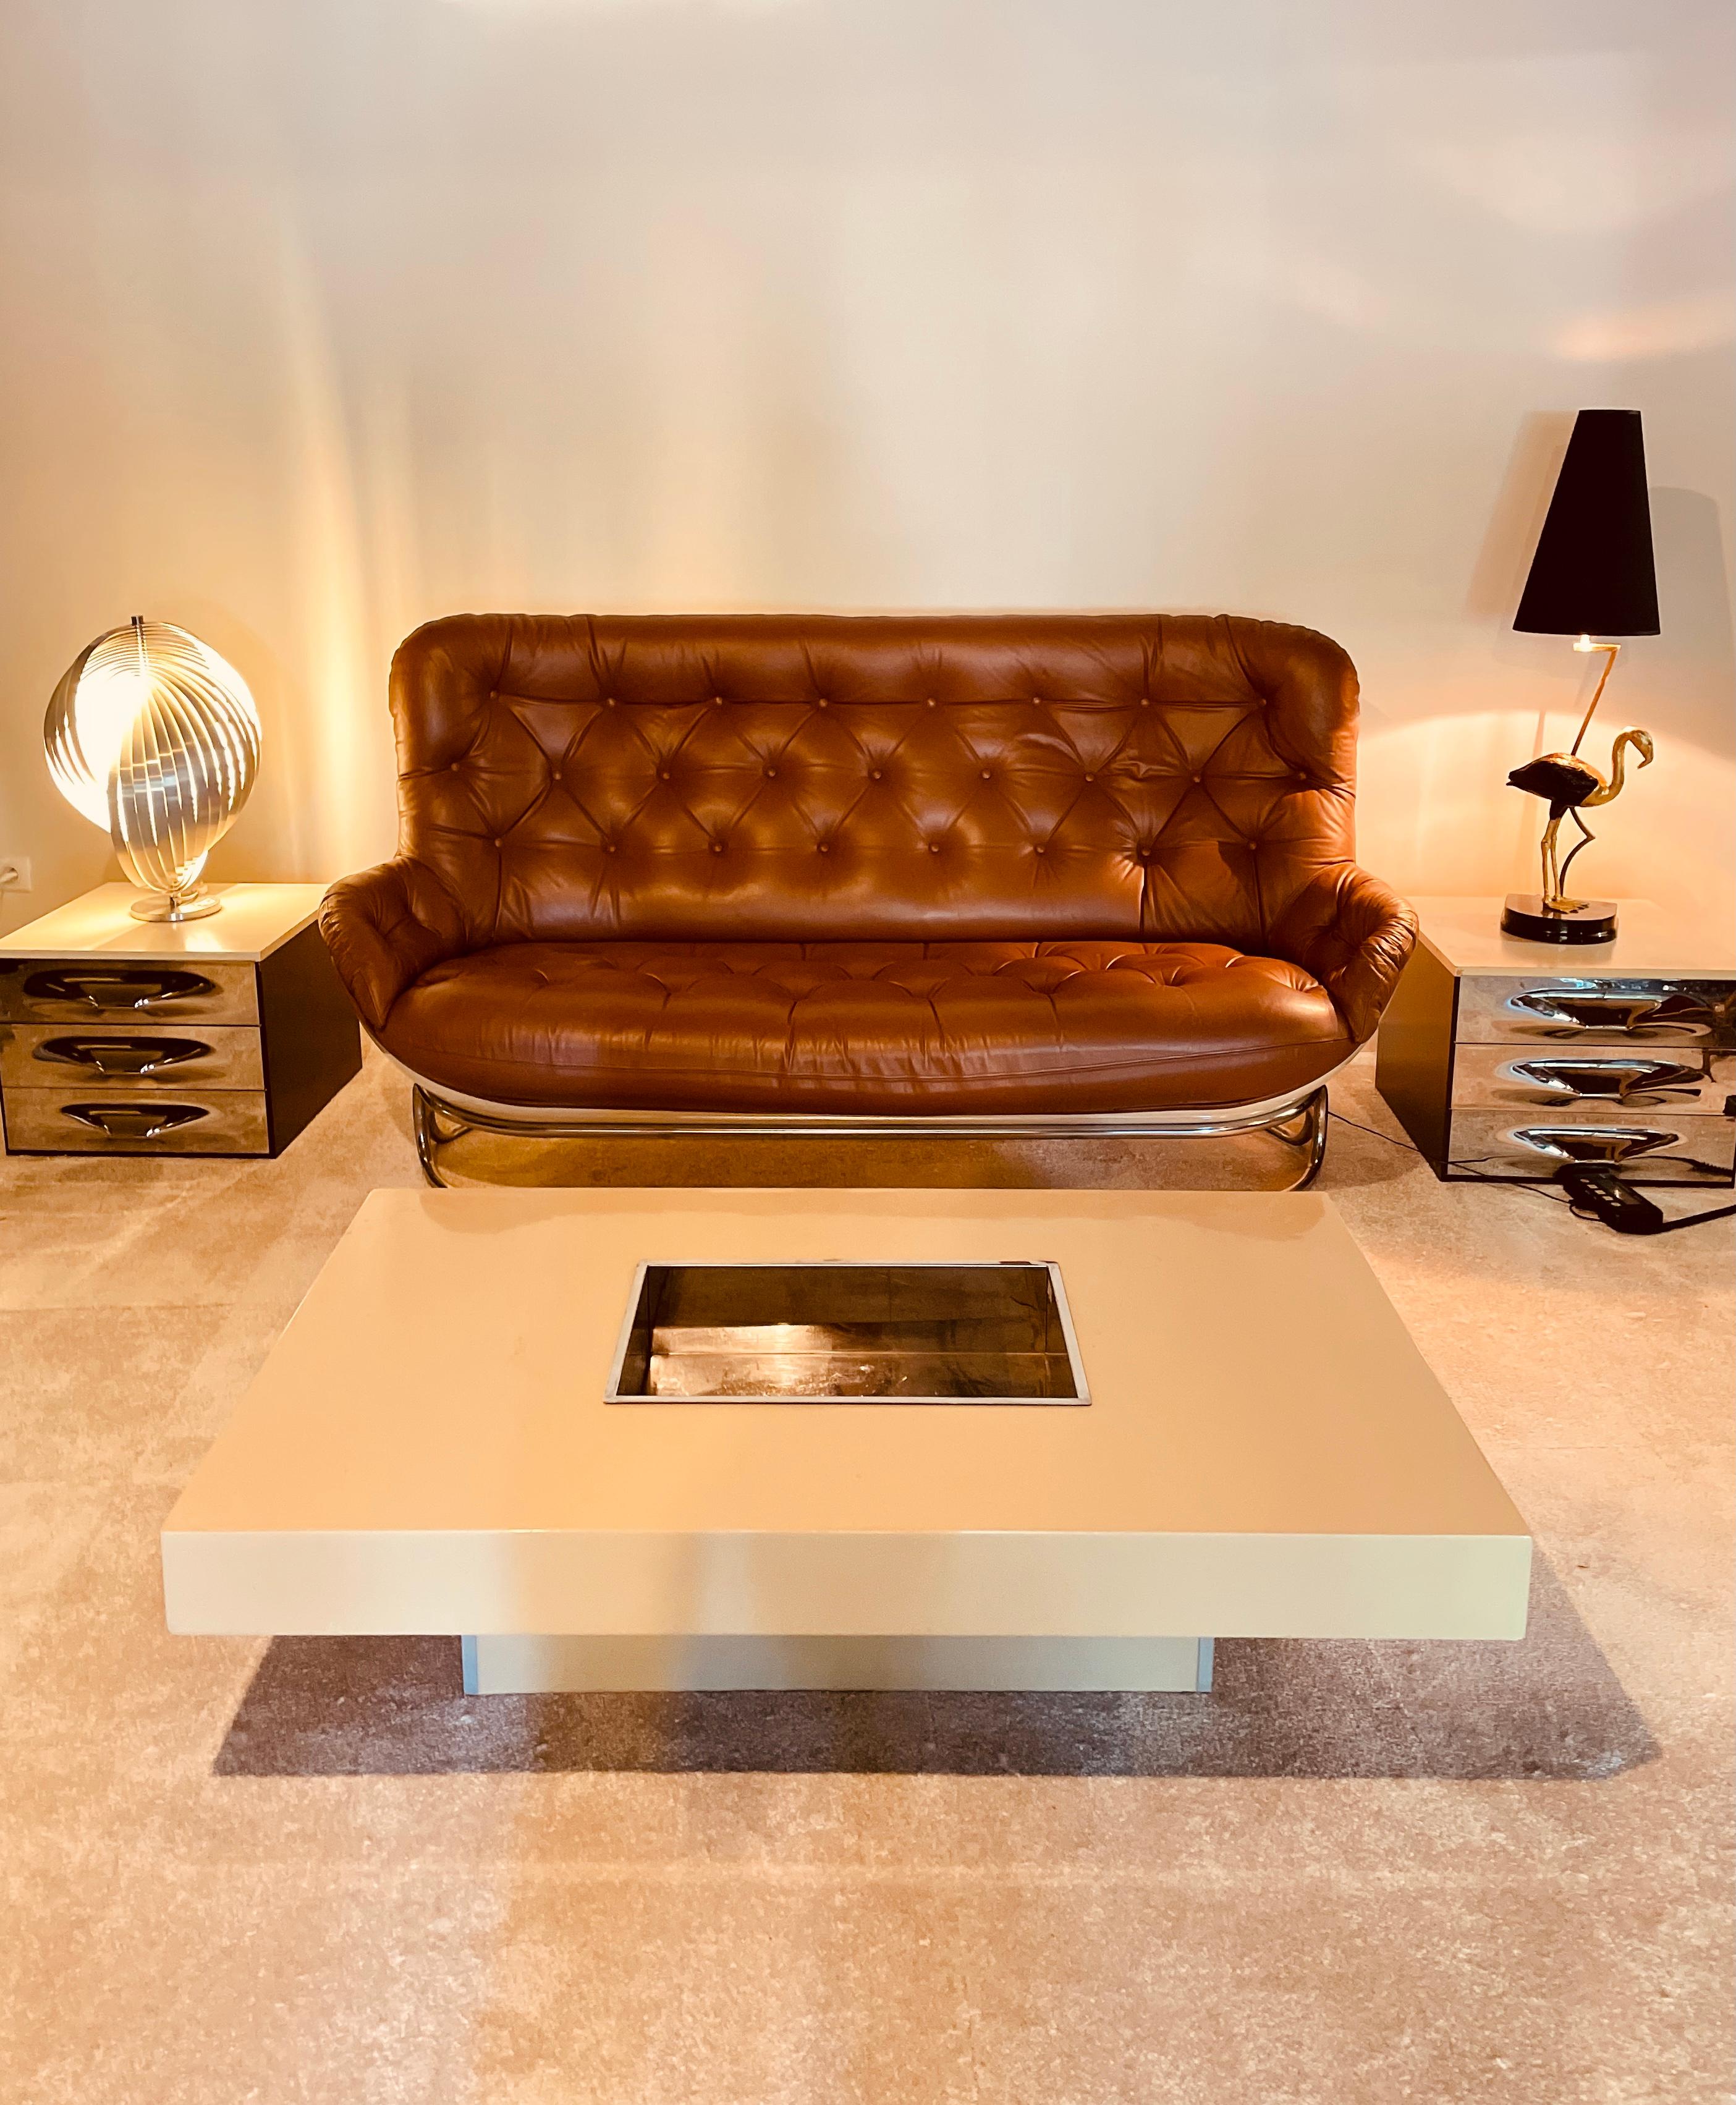 Black coffee table design Willy Rizzo edition Mario Sabot- Italy 1970 
Material: wood and metal 
Perfect condition.
 